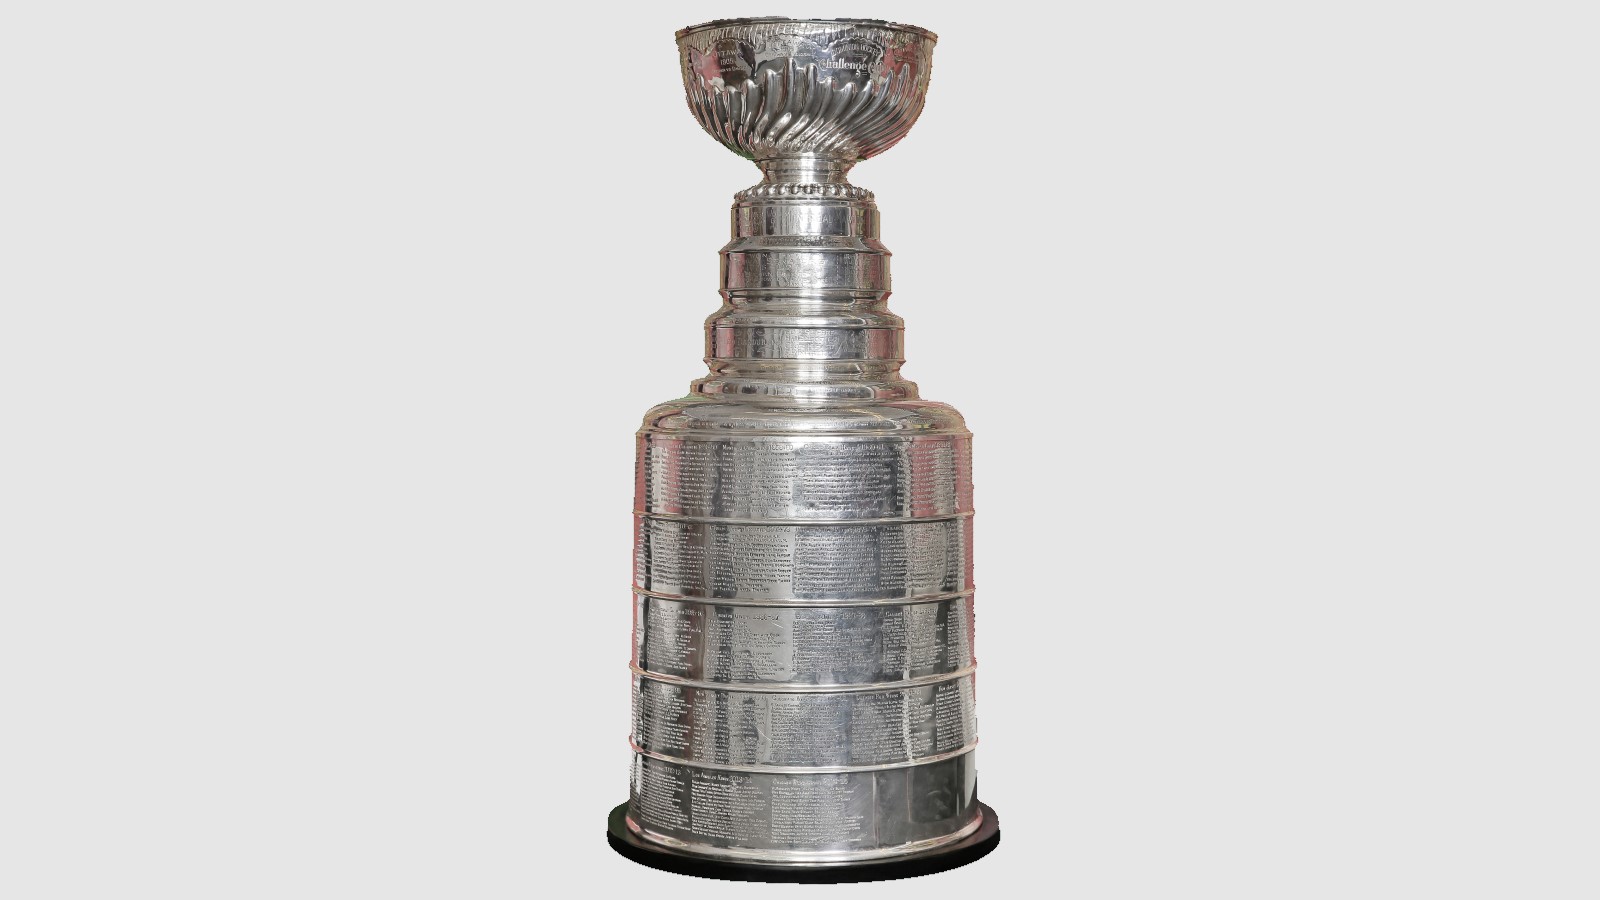 How to Watch Stanley Cup Finals 2019 Online Live Stream Boston Bruins